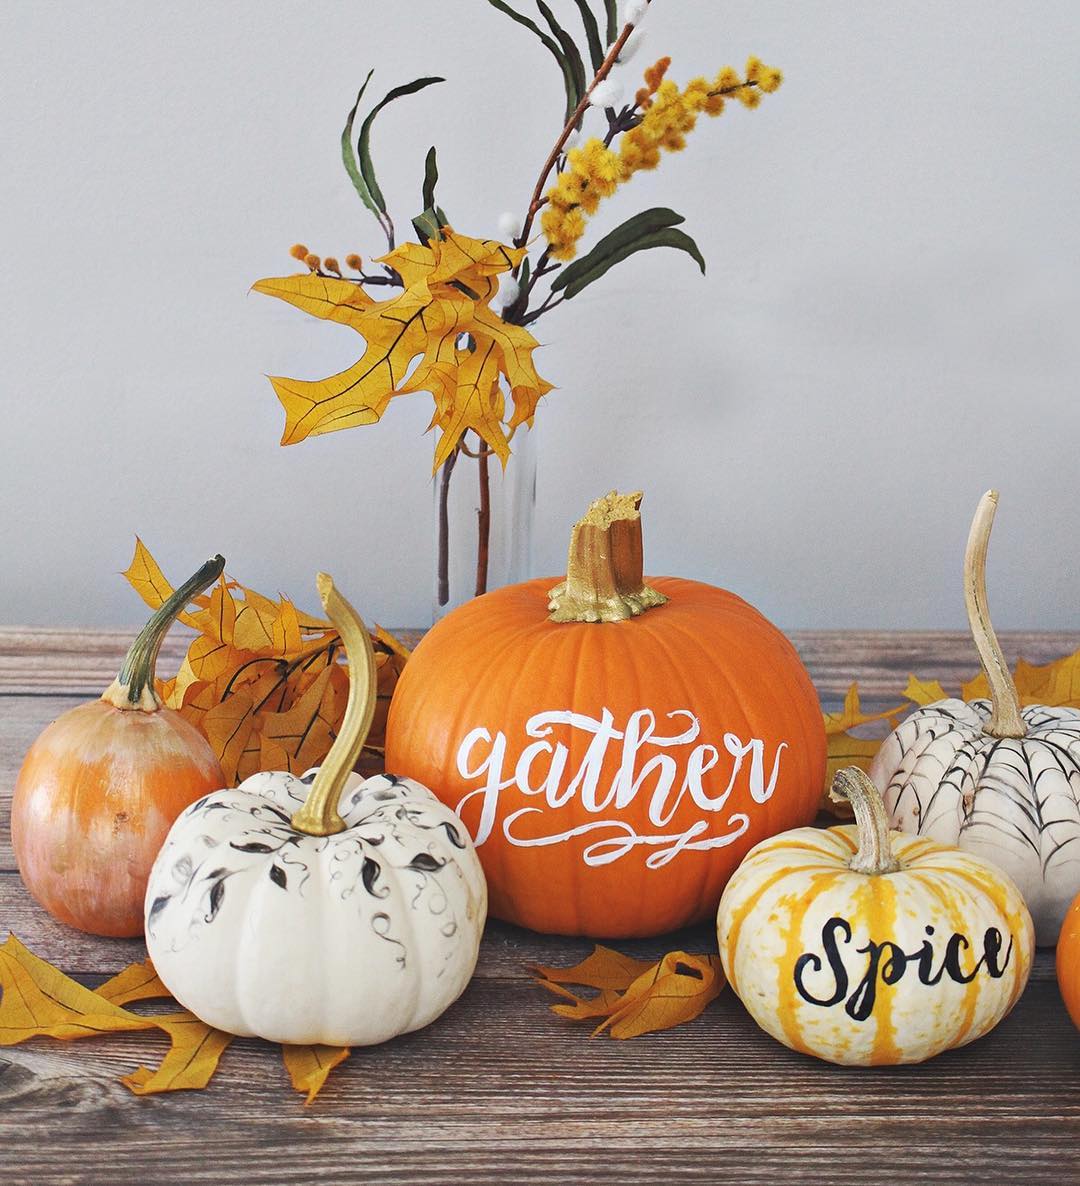 Pumpkins Painted and Decorated for the Holidays. Photo by Instagram user @valeriemckeehan